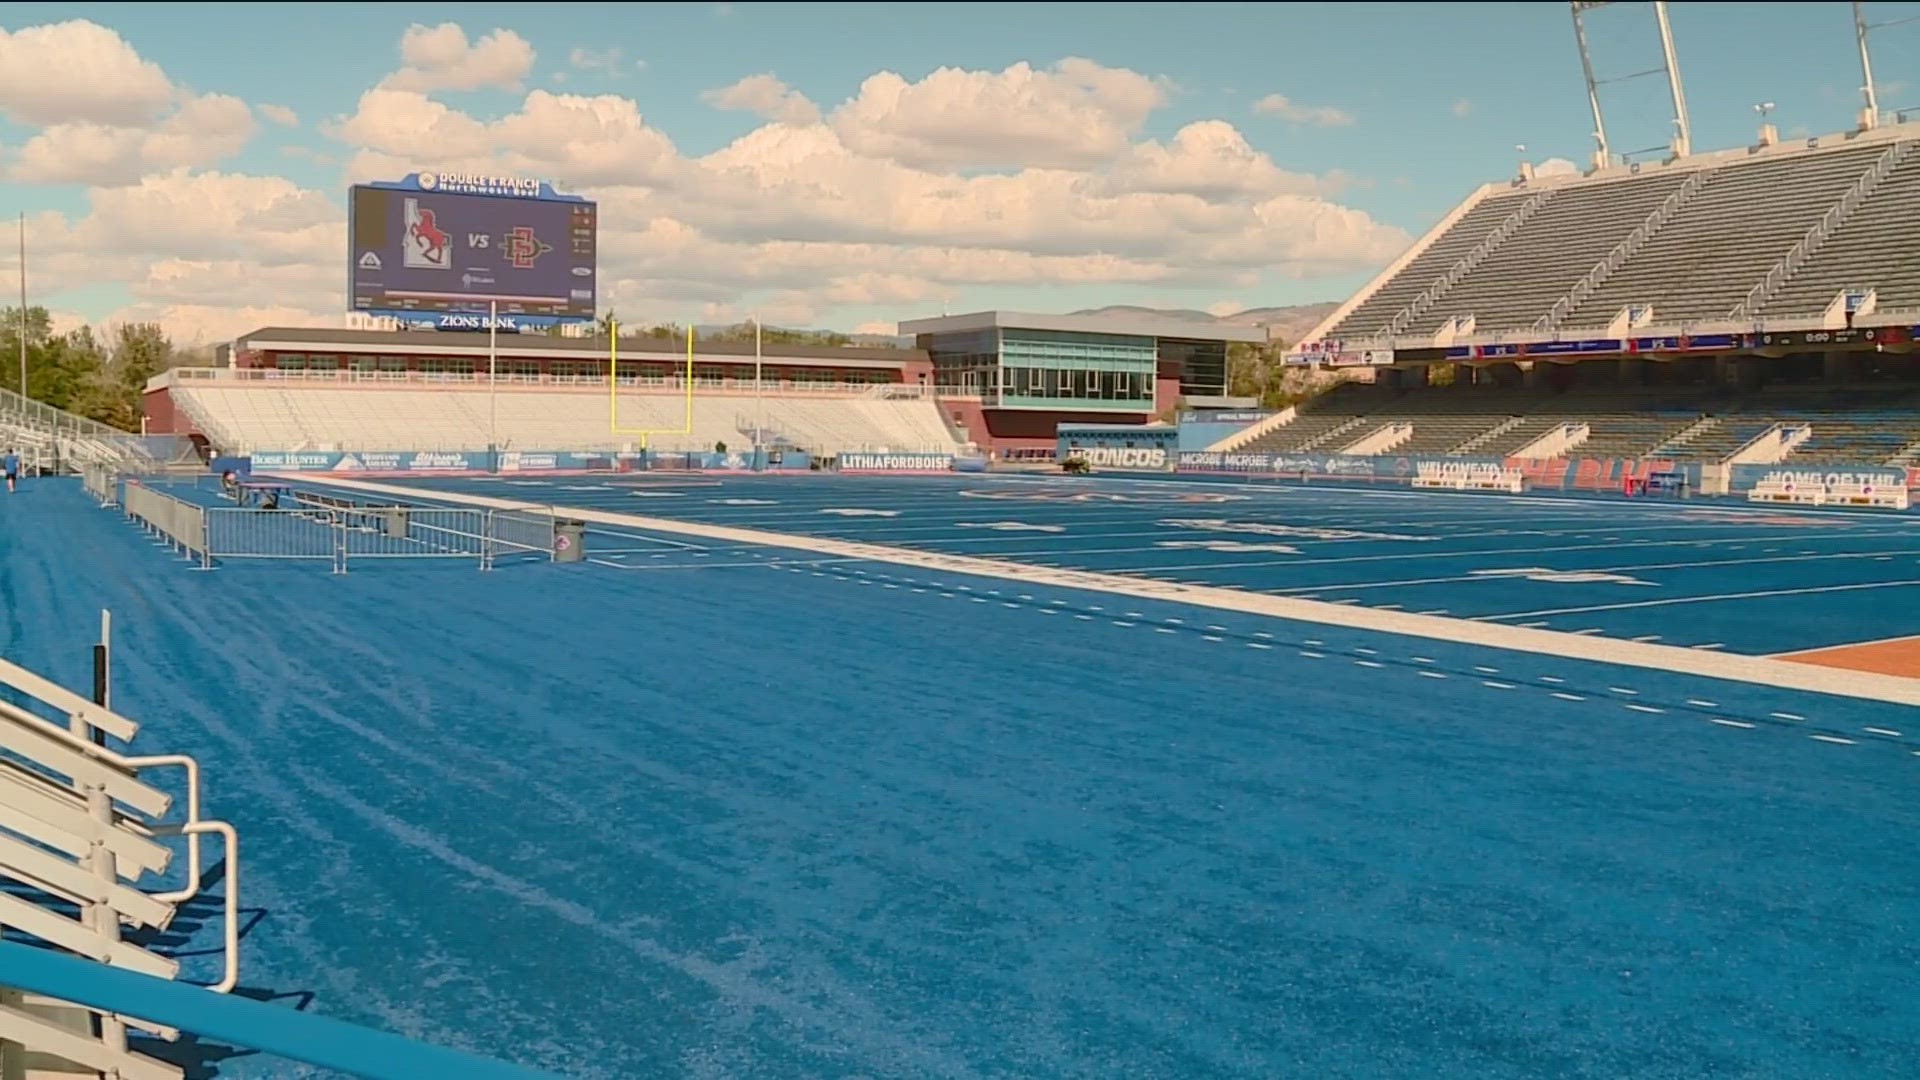 Boise State's Blue Turf is in the running for USA Today's Readers' Choice 2023 award for best attraction for sports fans.